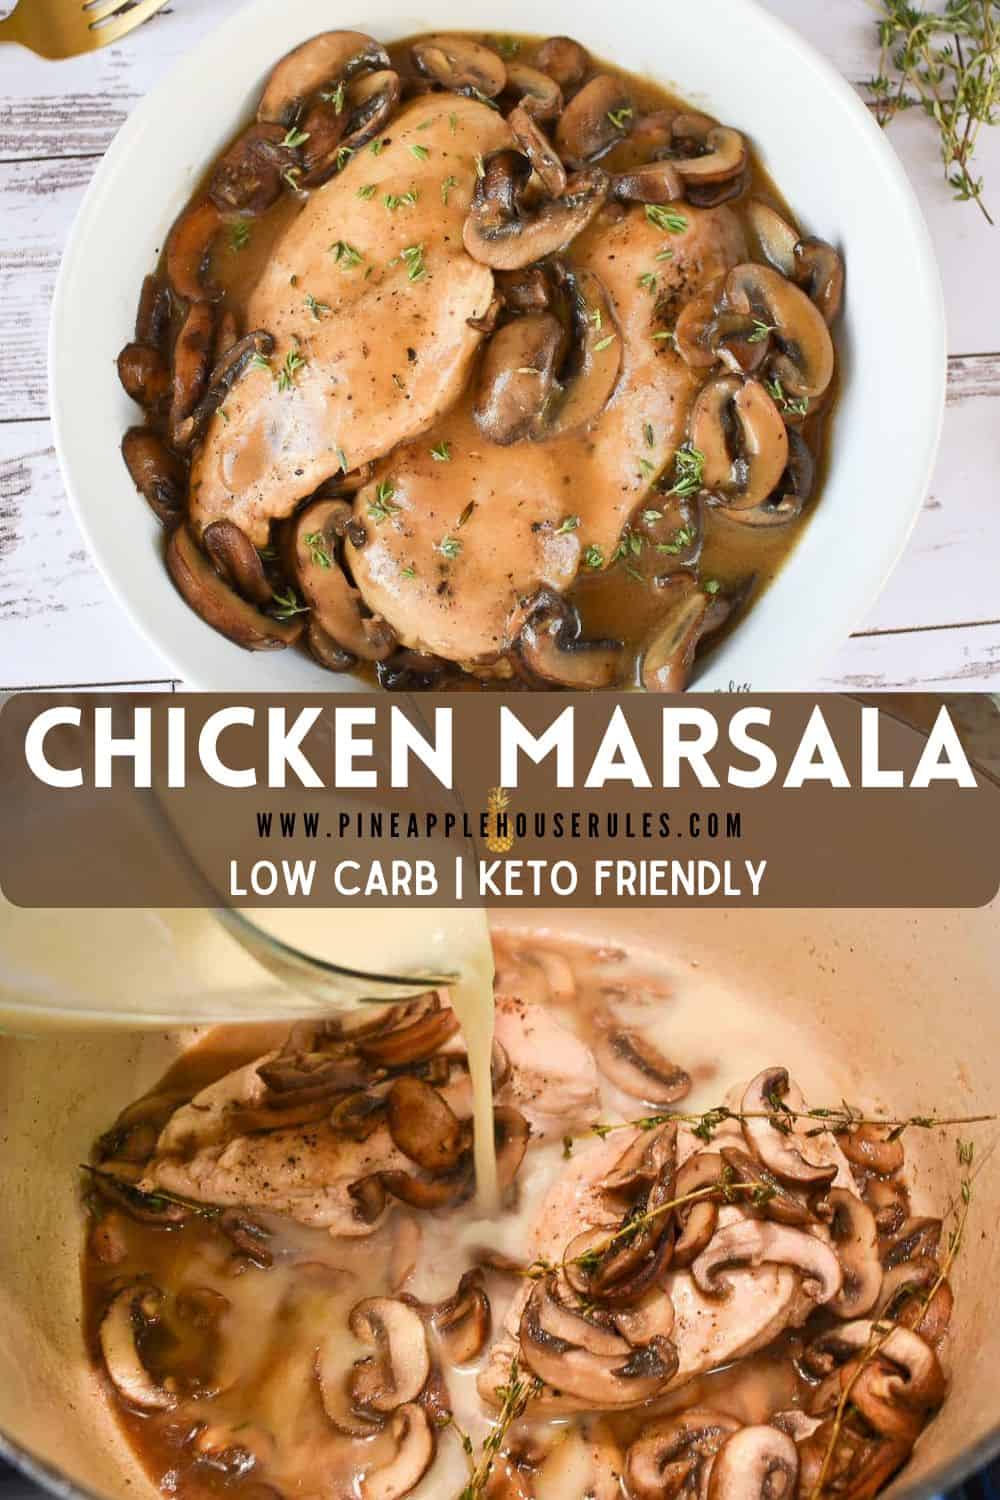 This Creamy Chicken Marsala recipe is so deliciously simple! It's also low carb and Keto friendly, plus it can be on the table in under 30 minutes! You've gotta love a Comfort Food Classic that's a one pot wonder. Chicken Marsala | Chicken Marsala Recipe | Chicken Marsala Easy | Chicken Marsala Recipe Best | Chicken Recipes | Chicken Breast Recipes | Keto Recipes | Keto Dinner Recipes | Low Carb Recipes | Low Carb Dinner | Low Carb Dinner Recipes | Dinner Under 500 Calories | 30 Minute Meals